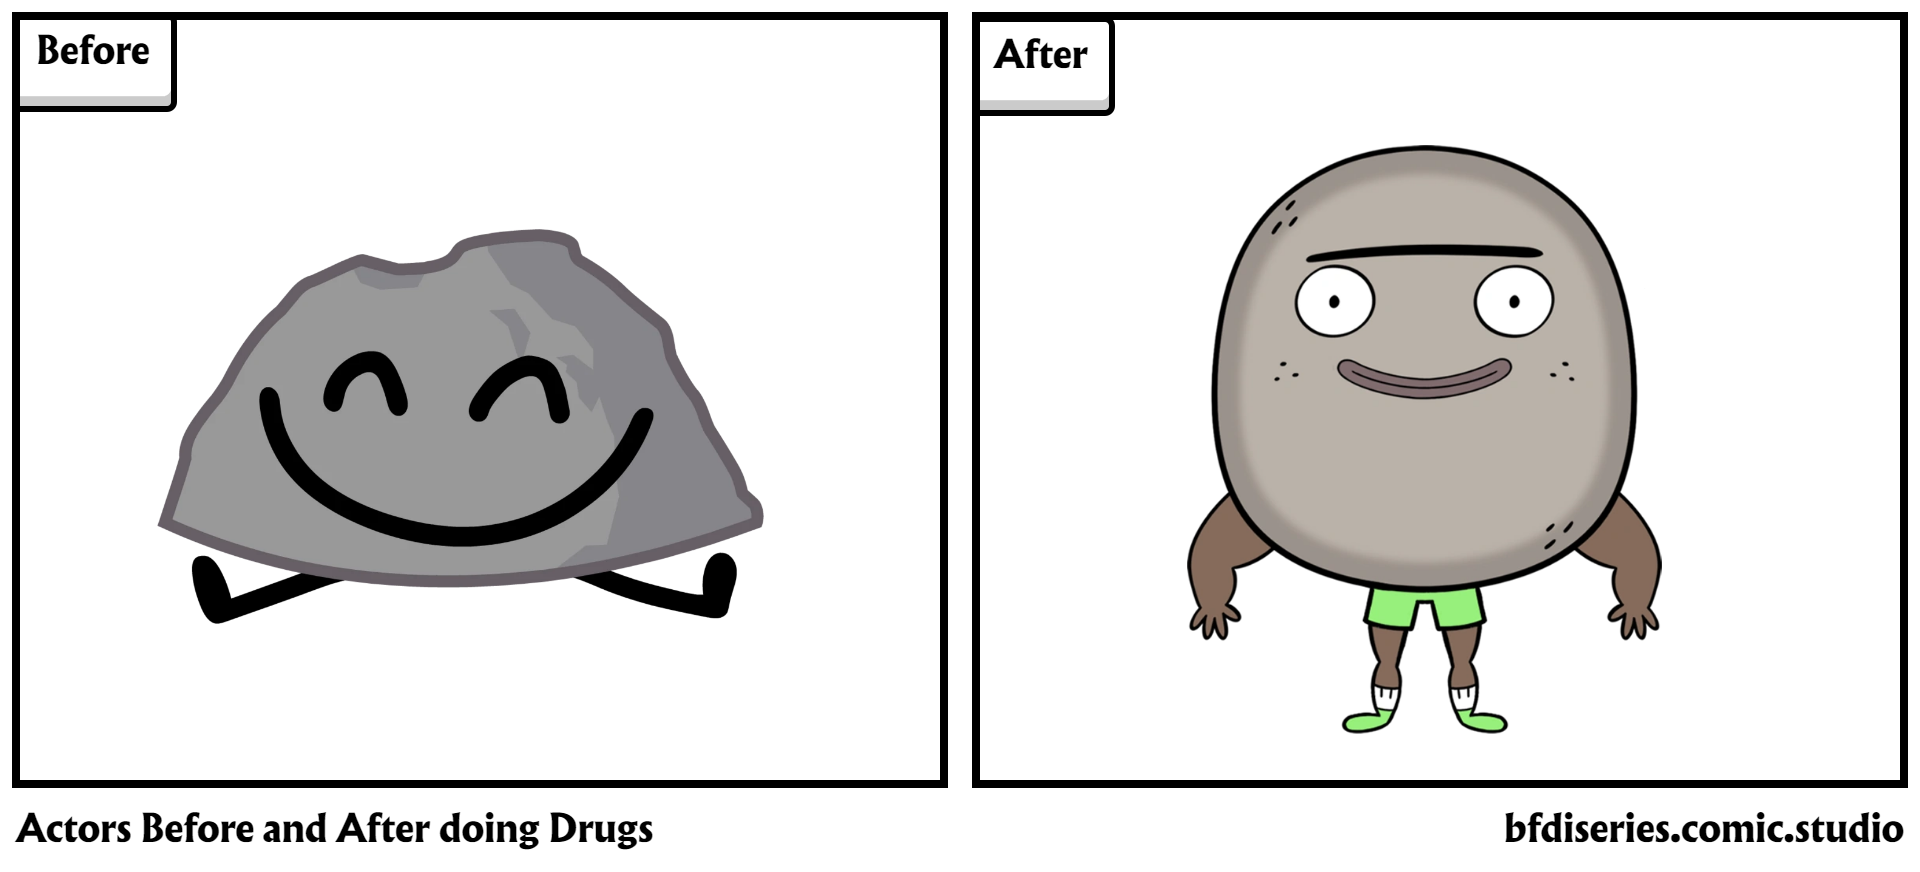 Actors Before and After doing Drugs